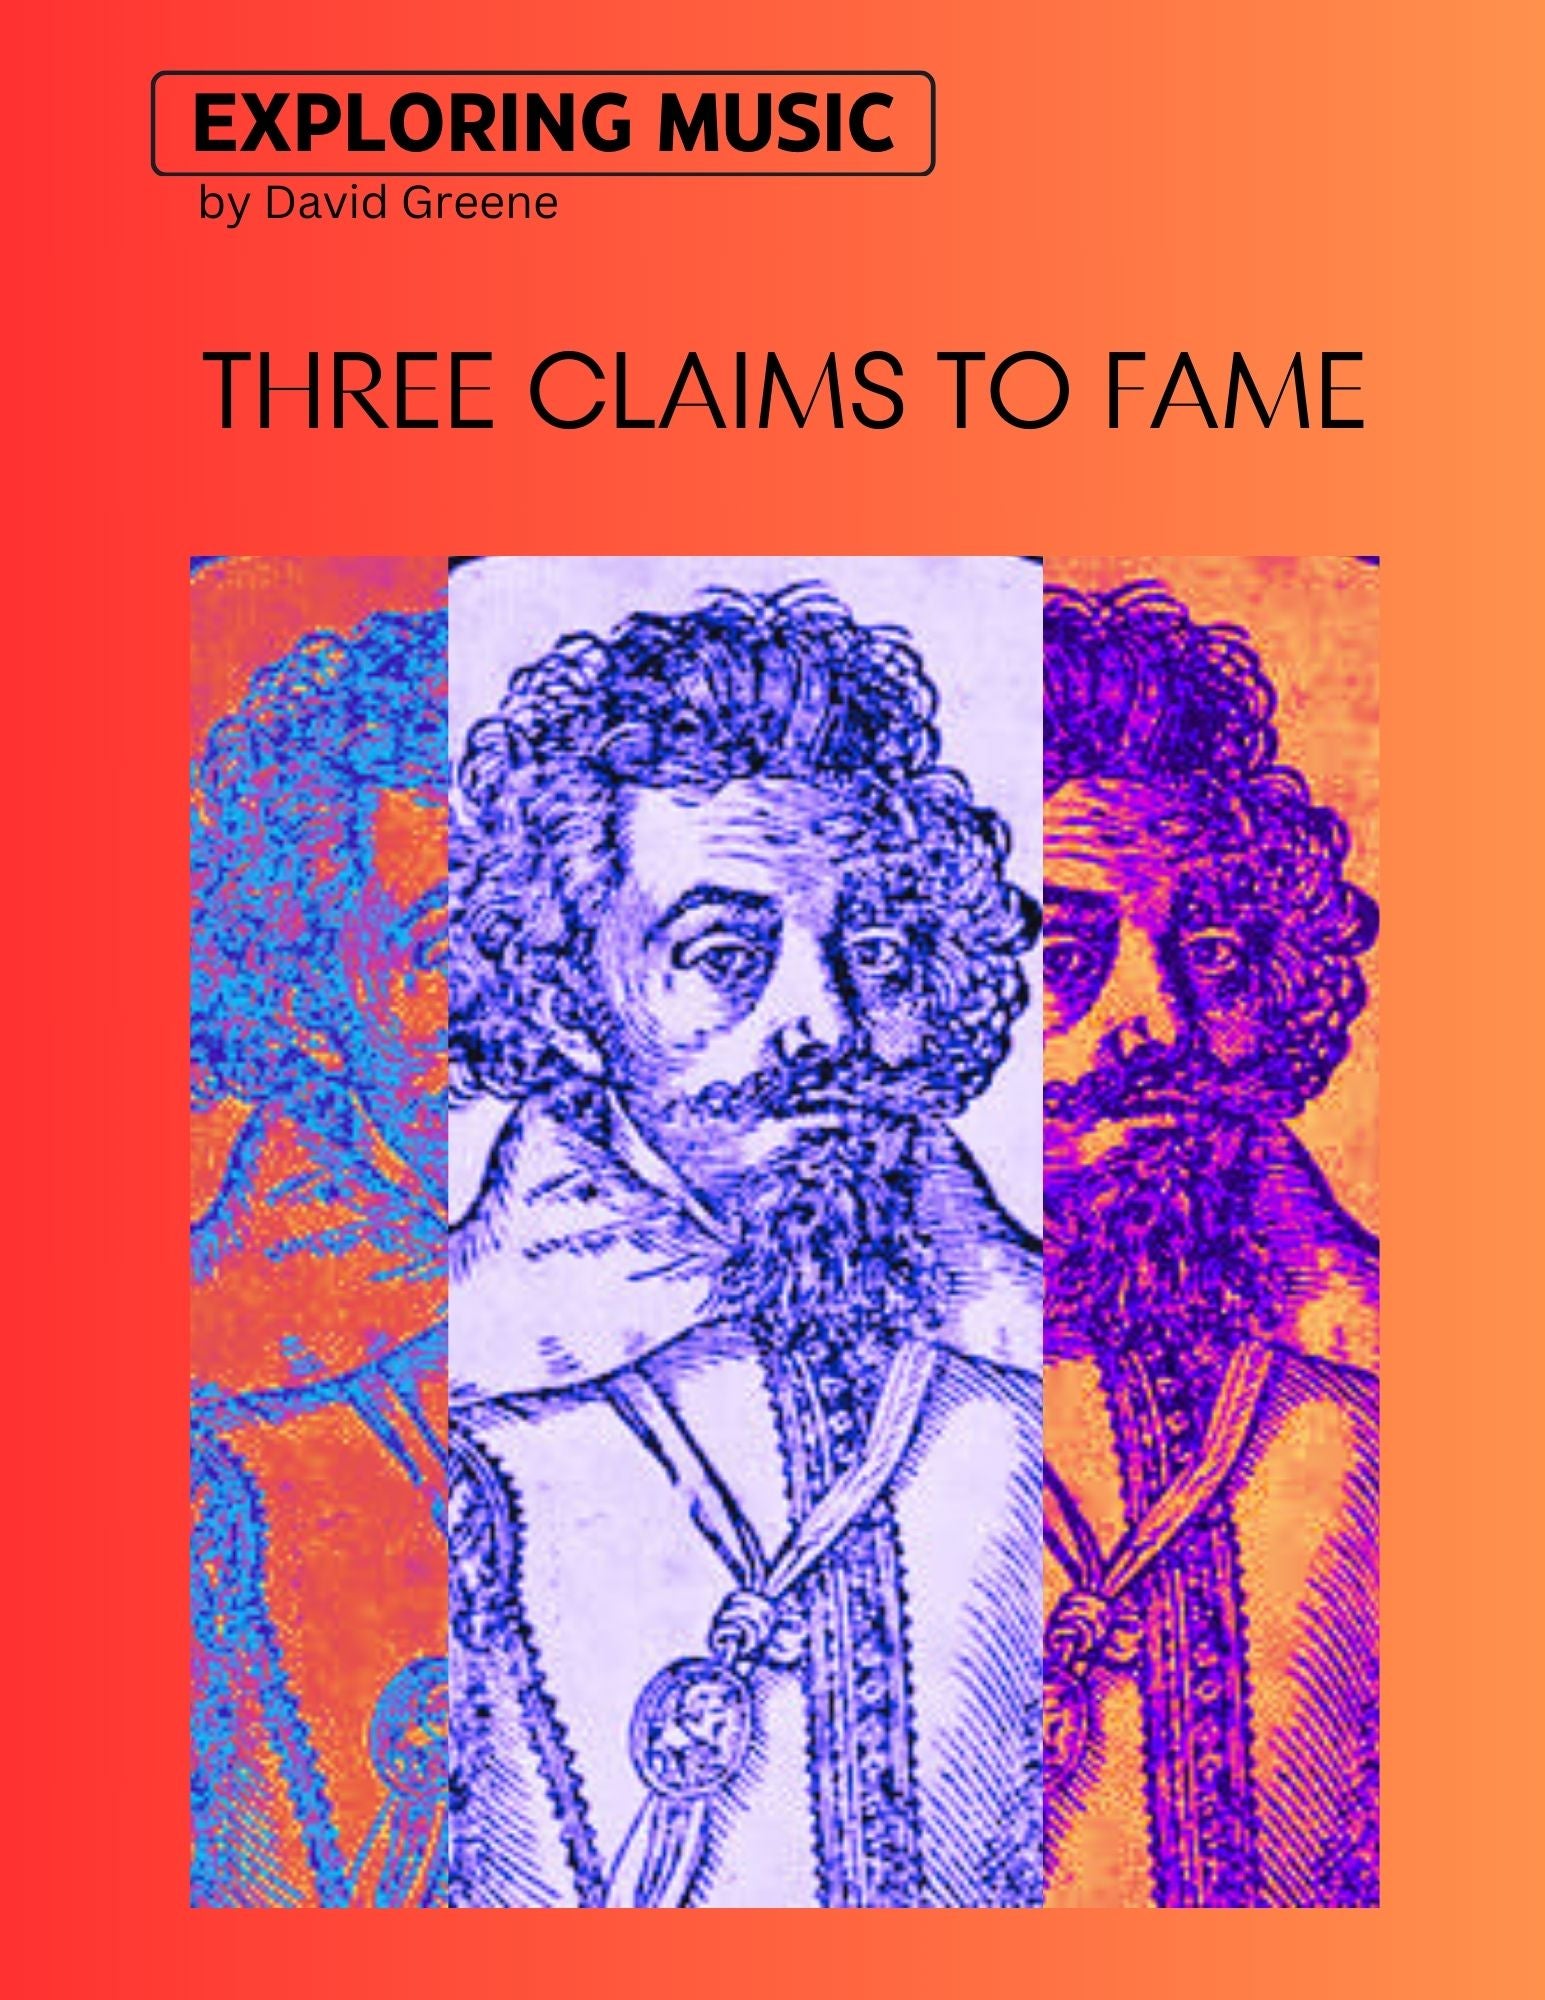 EXPLORING MUSIC: Three Claims to Fame